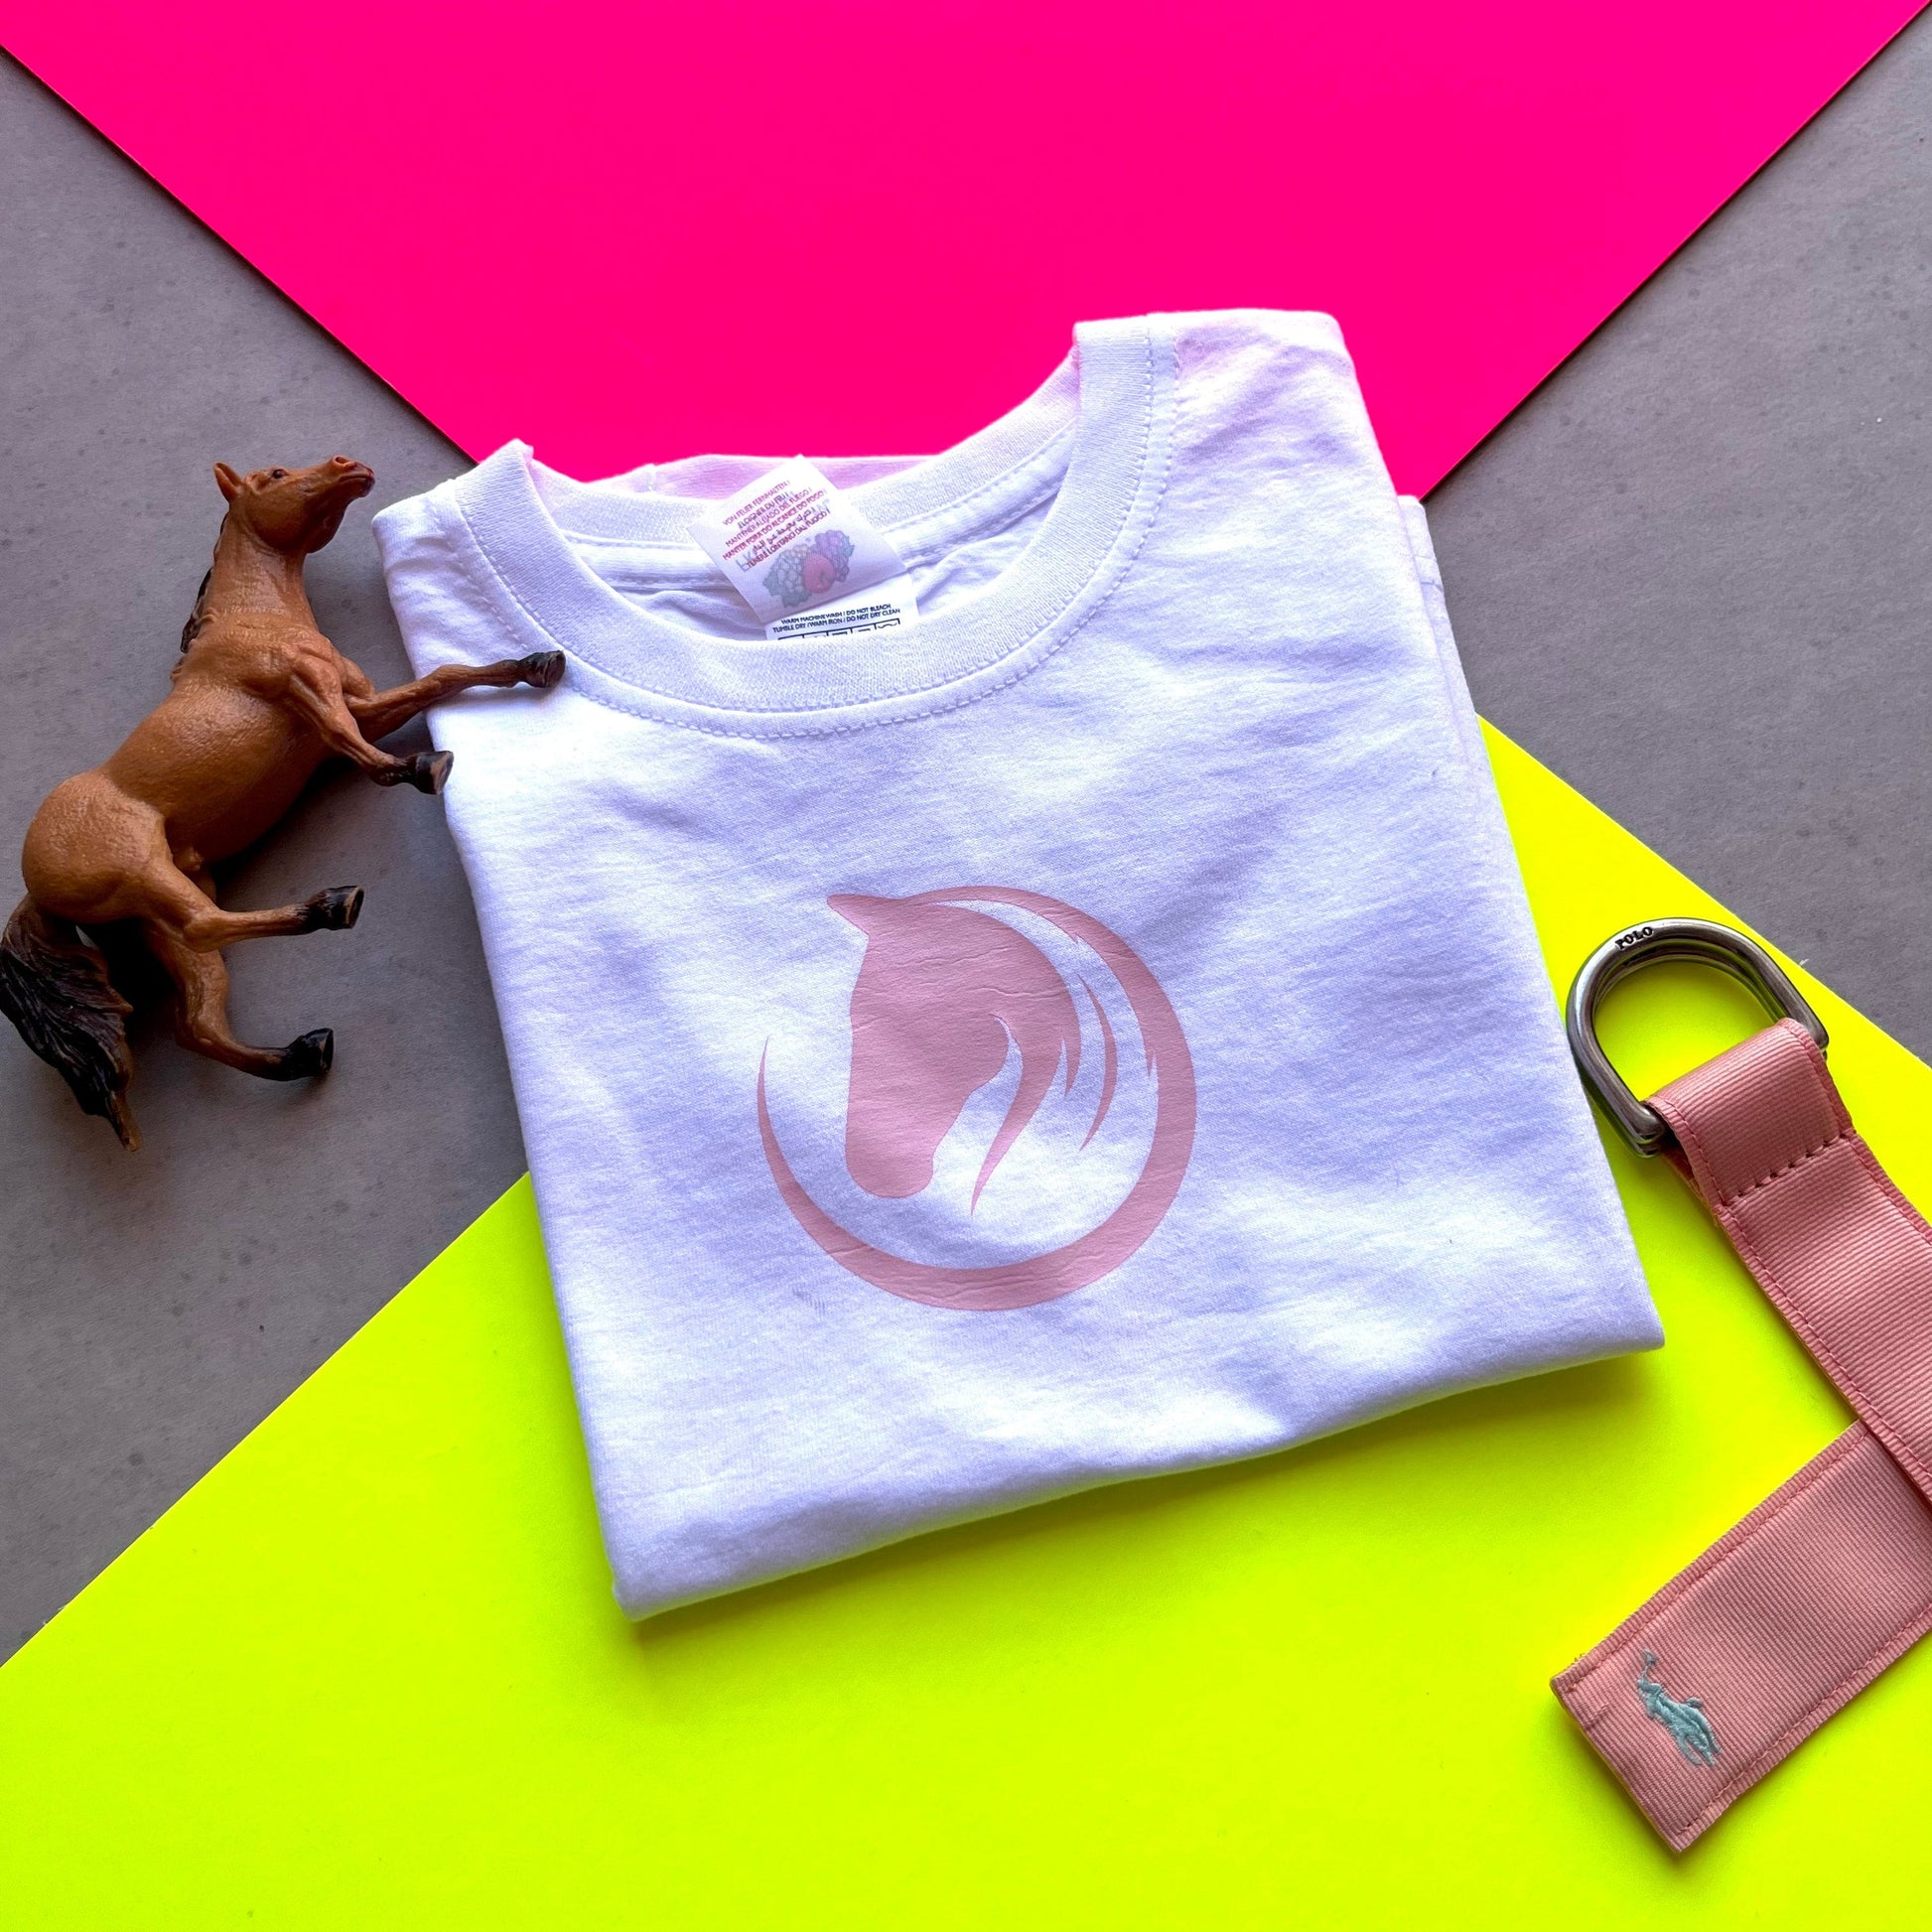 Horse T Shirt, pink horse riding tops or equestrian tops for kids